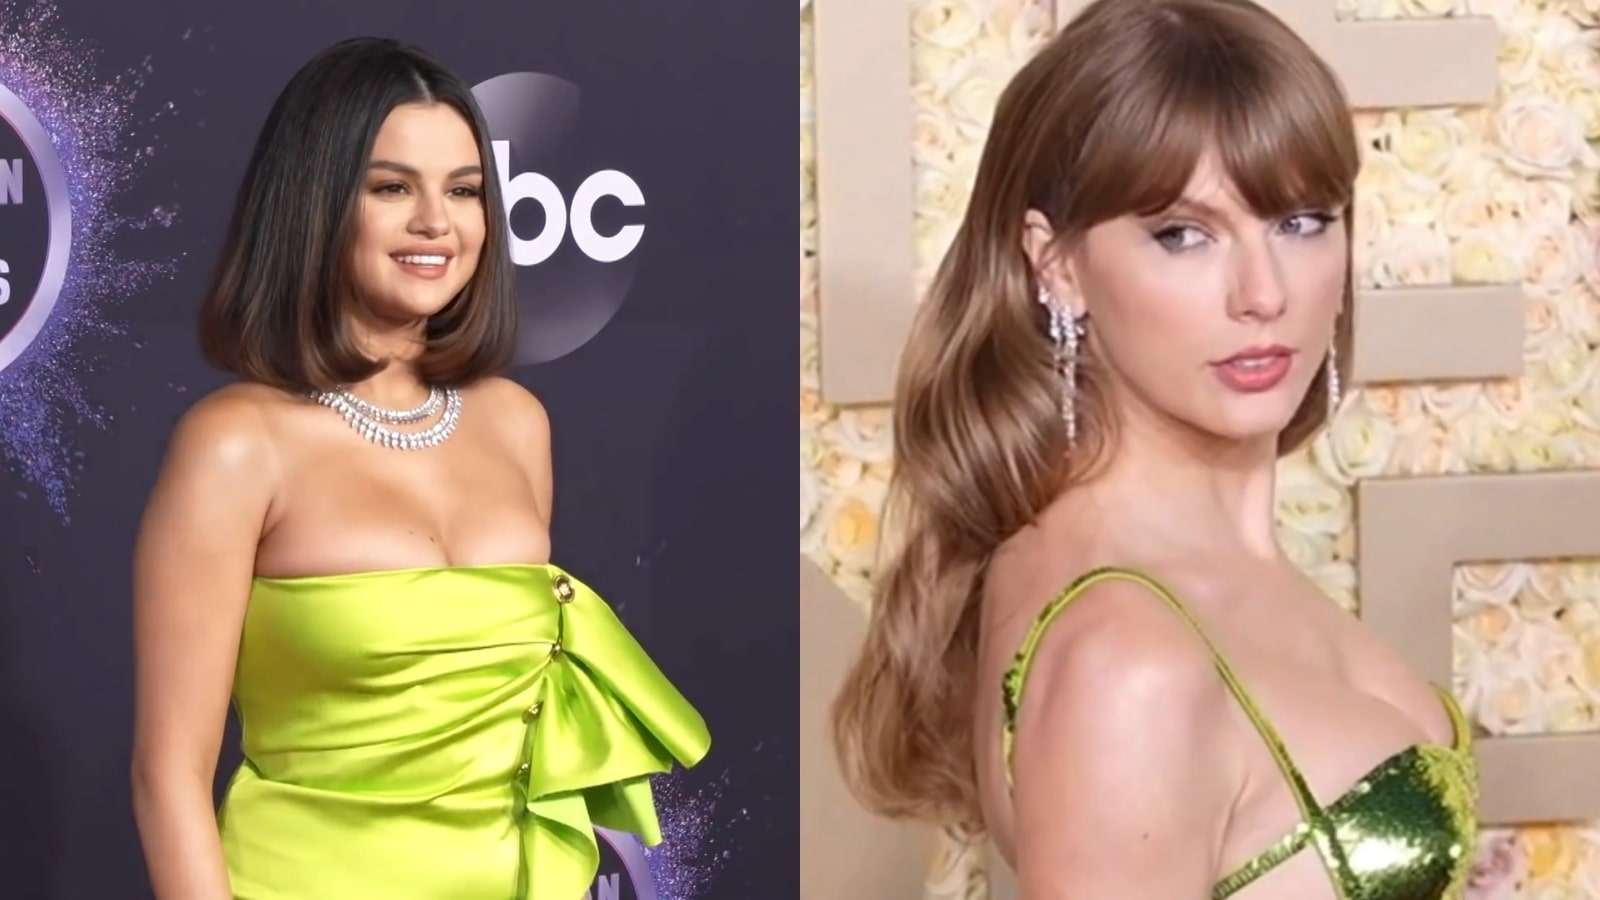 Taylor Swift and Selena Gomez in a side-by-side photo